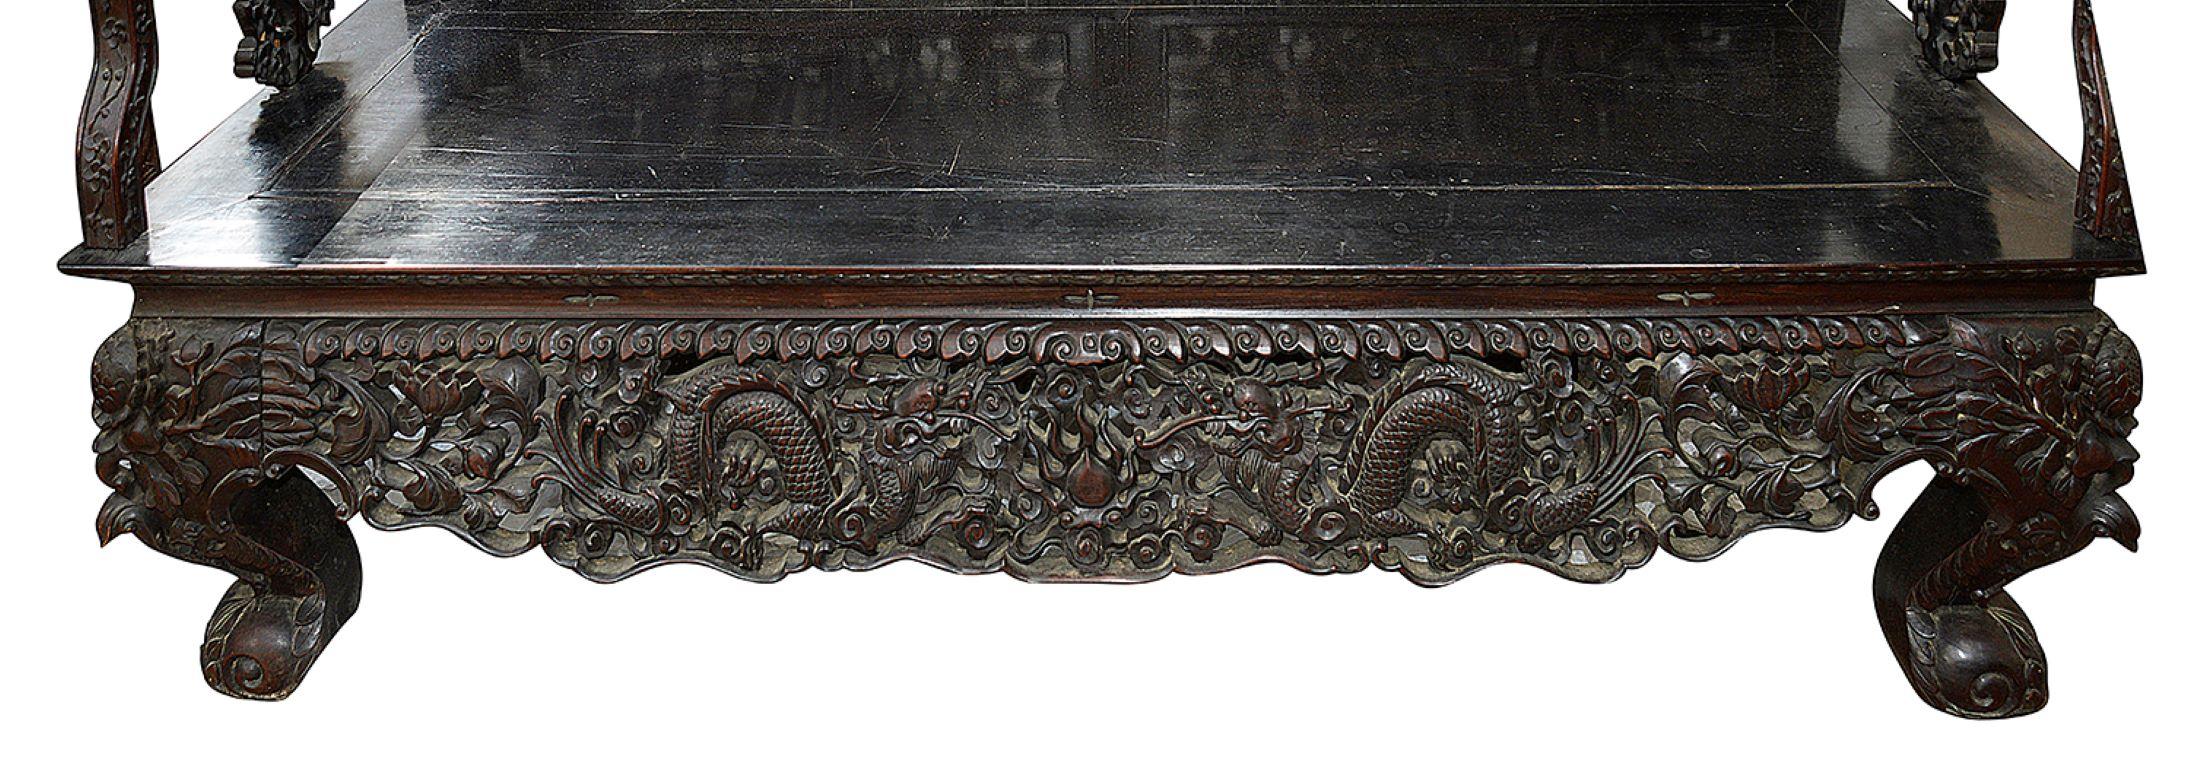 Hand-Carved 19th Century Chinese Hardwood Sofa, circa 1860 For Sale